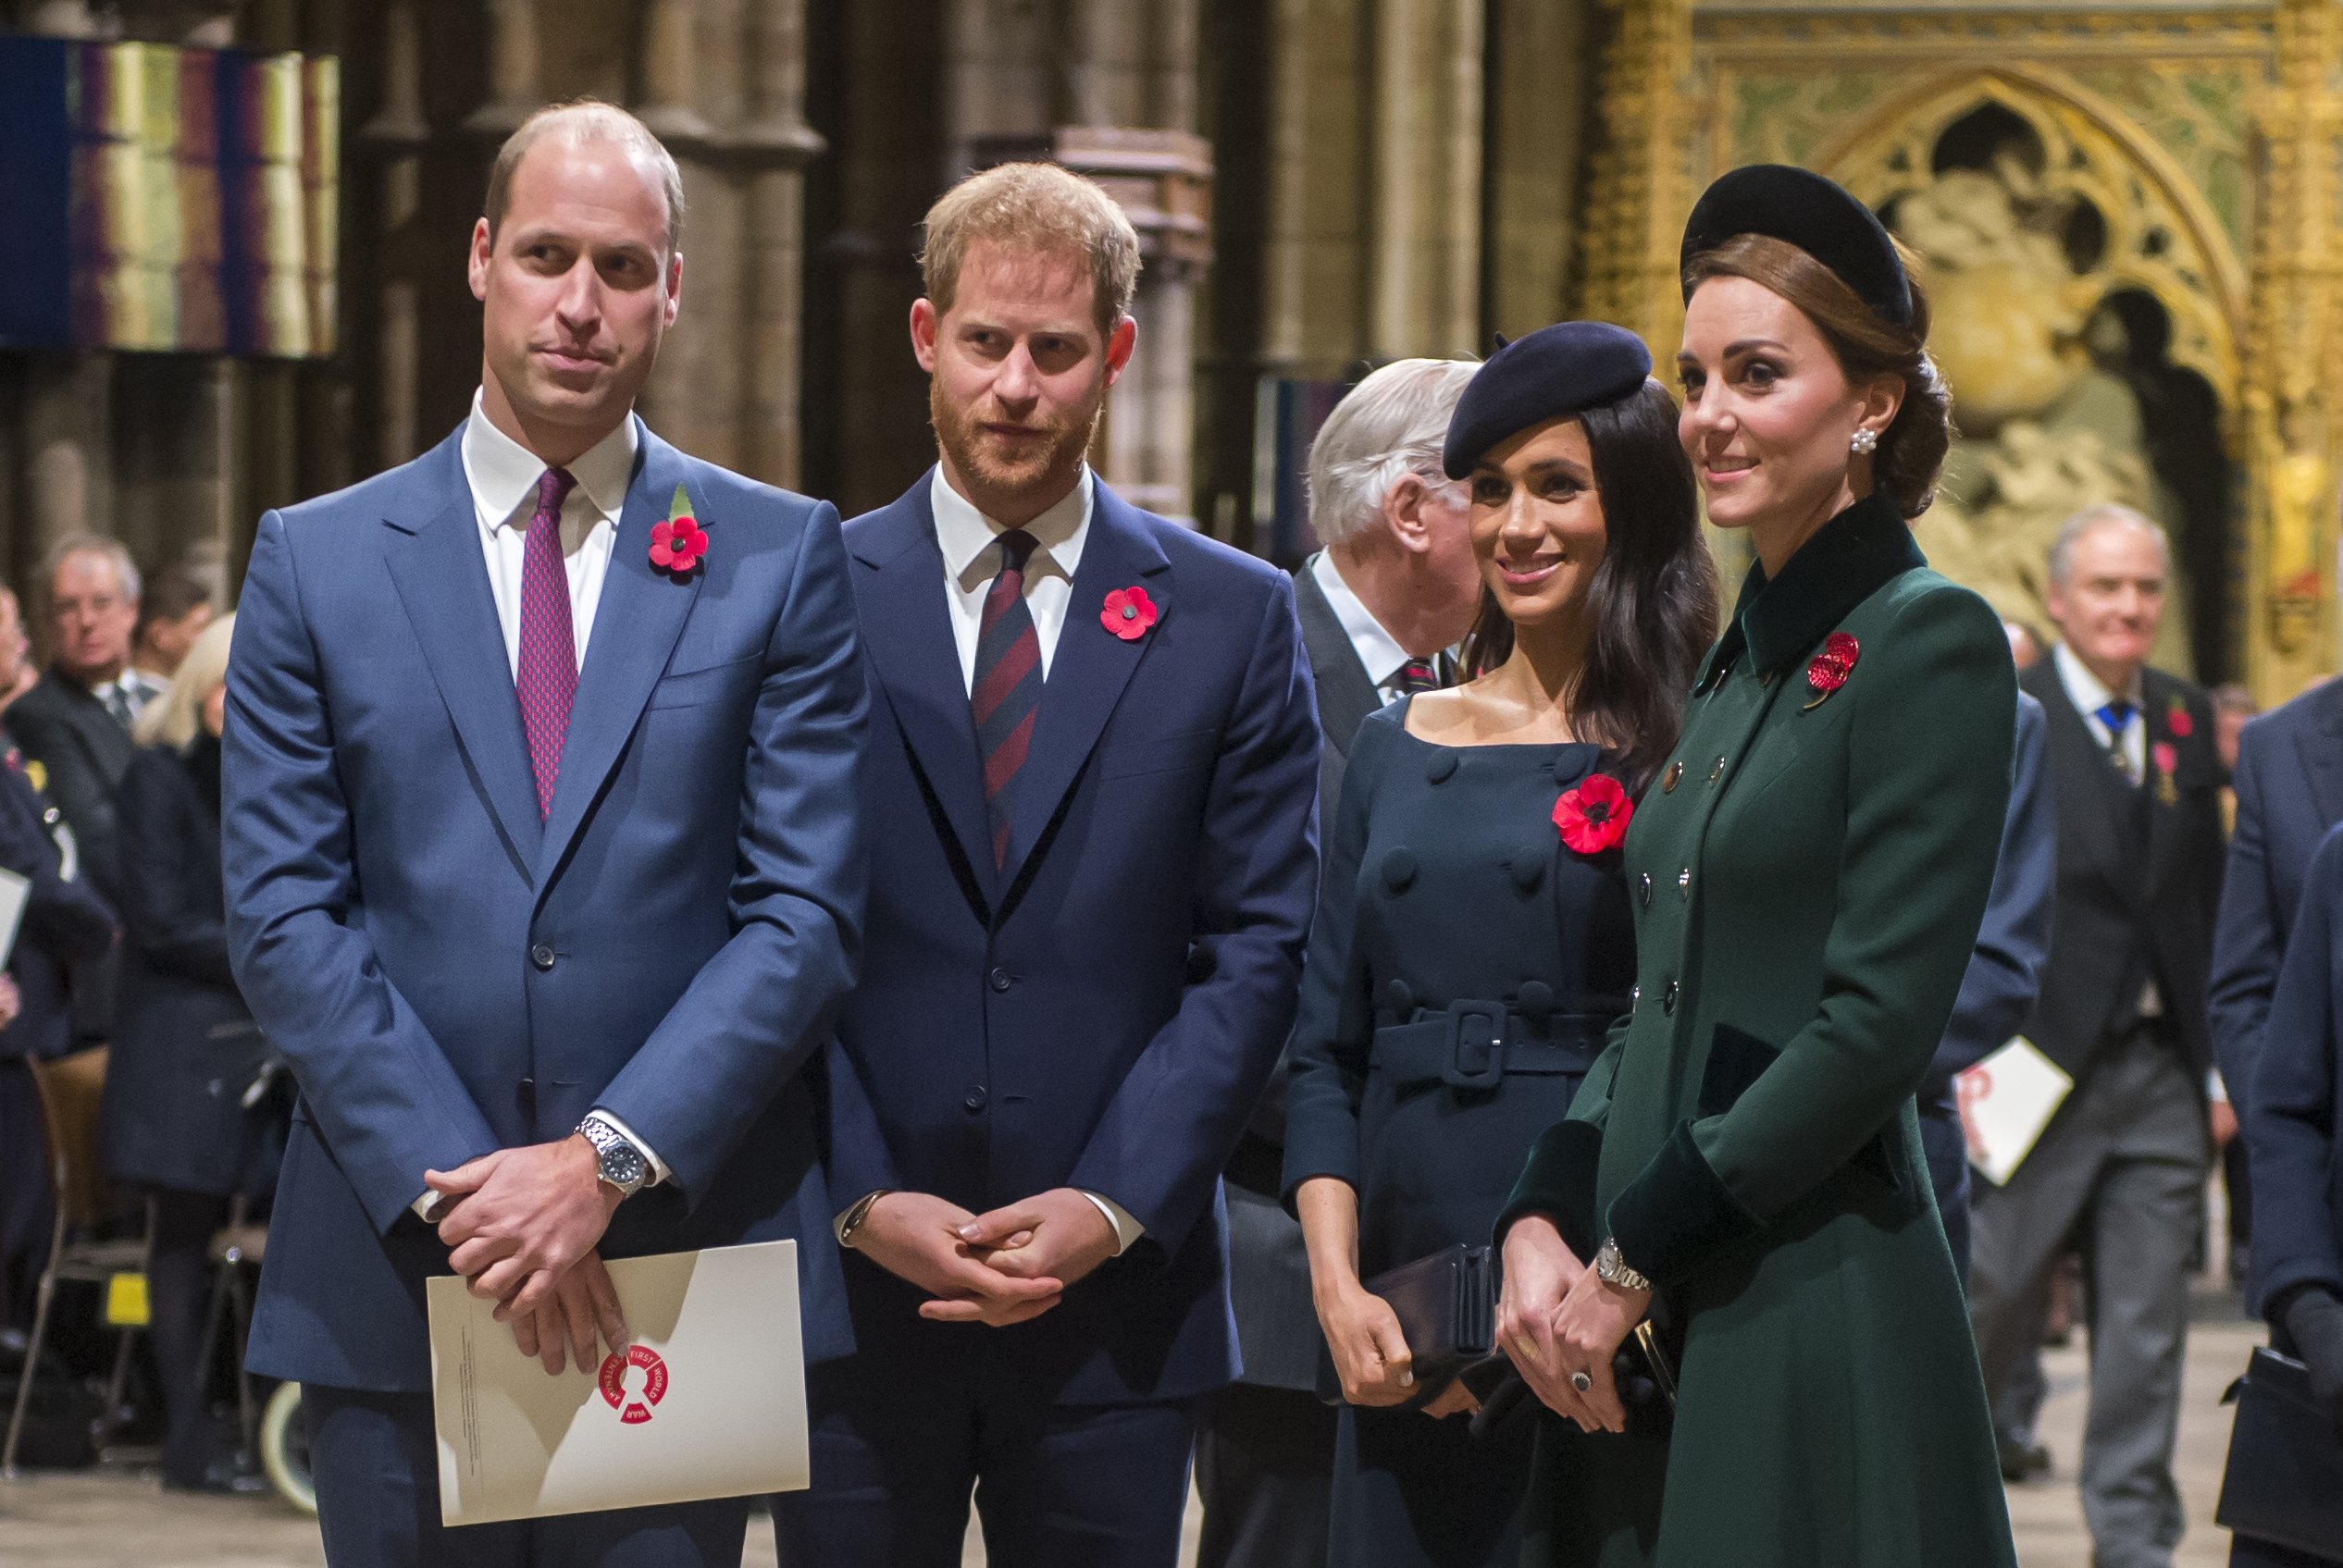 Prince William, Prince Harry, Meghan Markle and Kate Middleton arriving at Westminster Abbey to attend a service to mark the centenary of the Armistice on November 11, 2018 in London. / Source: Getty Images